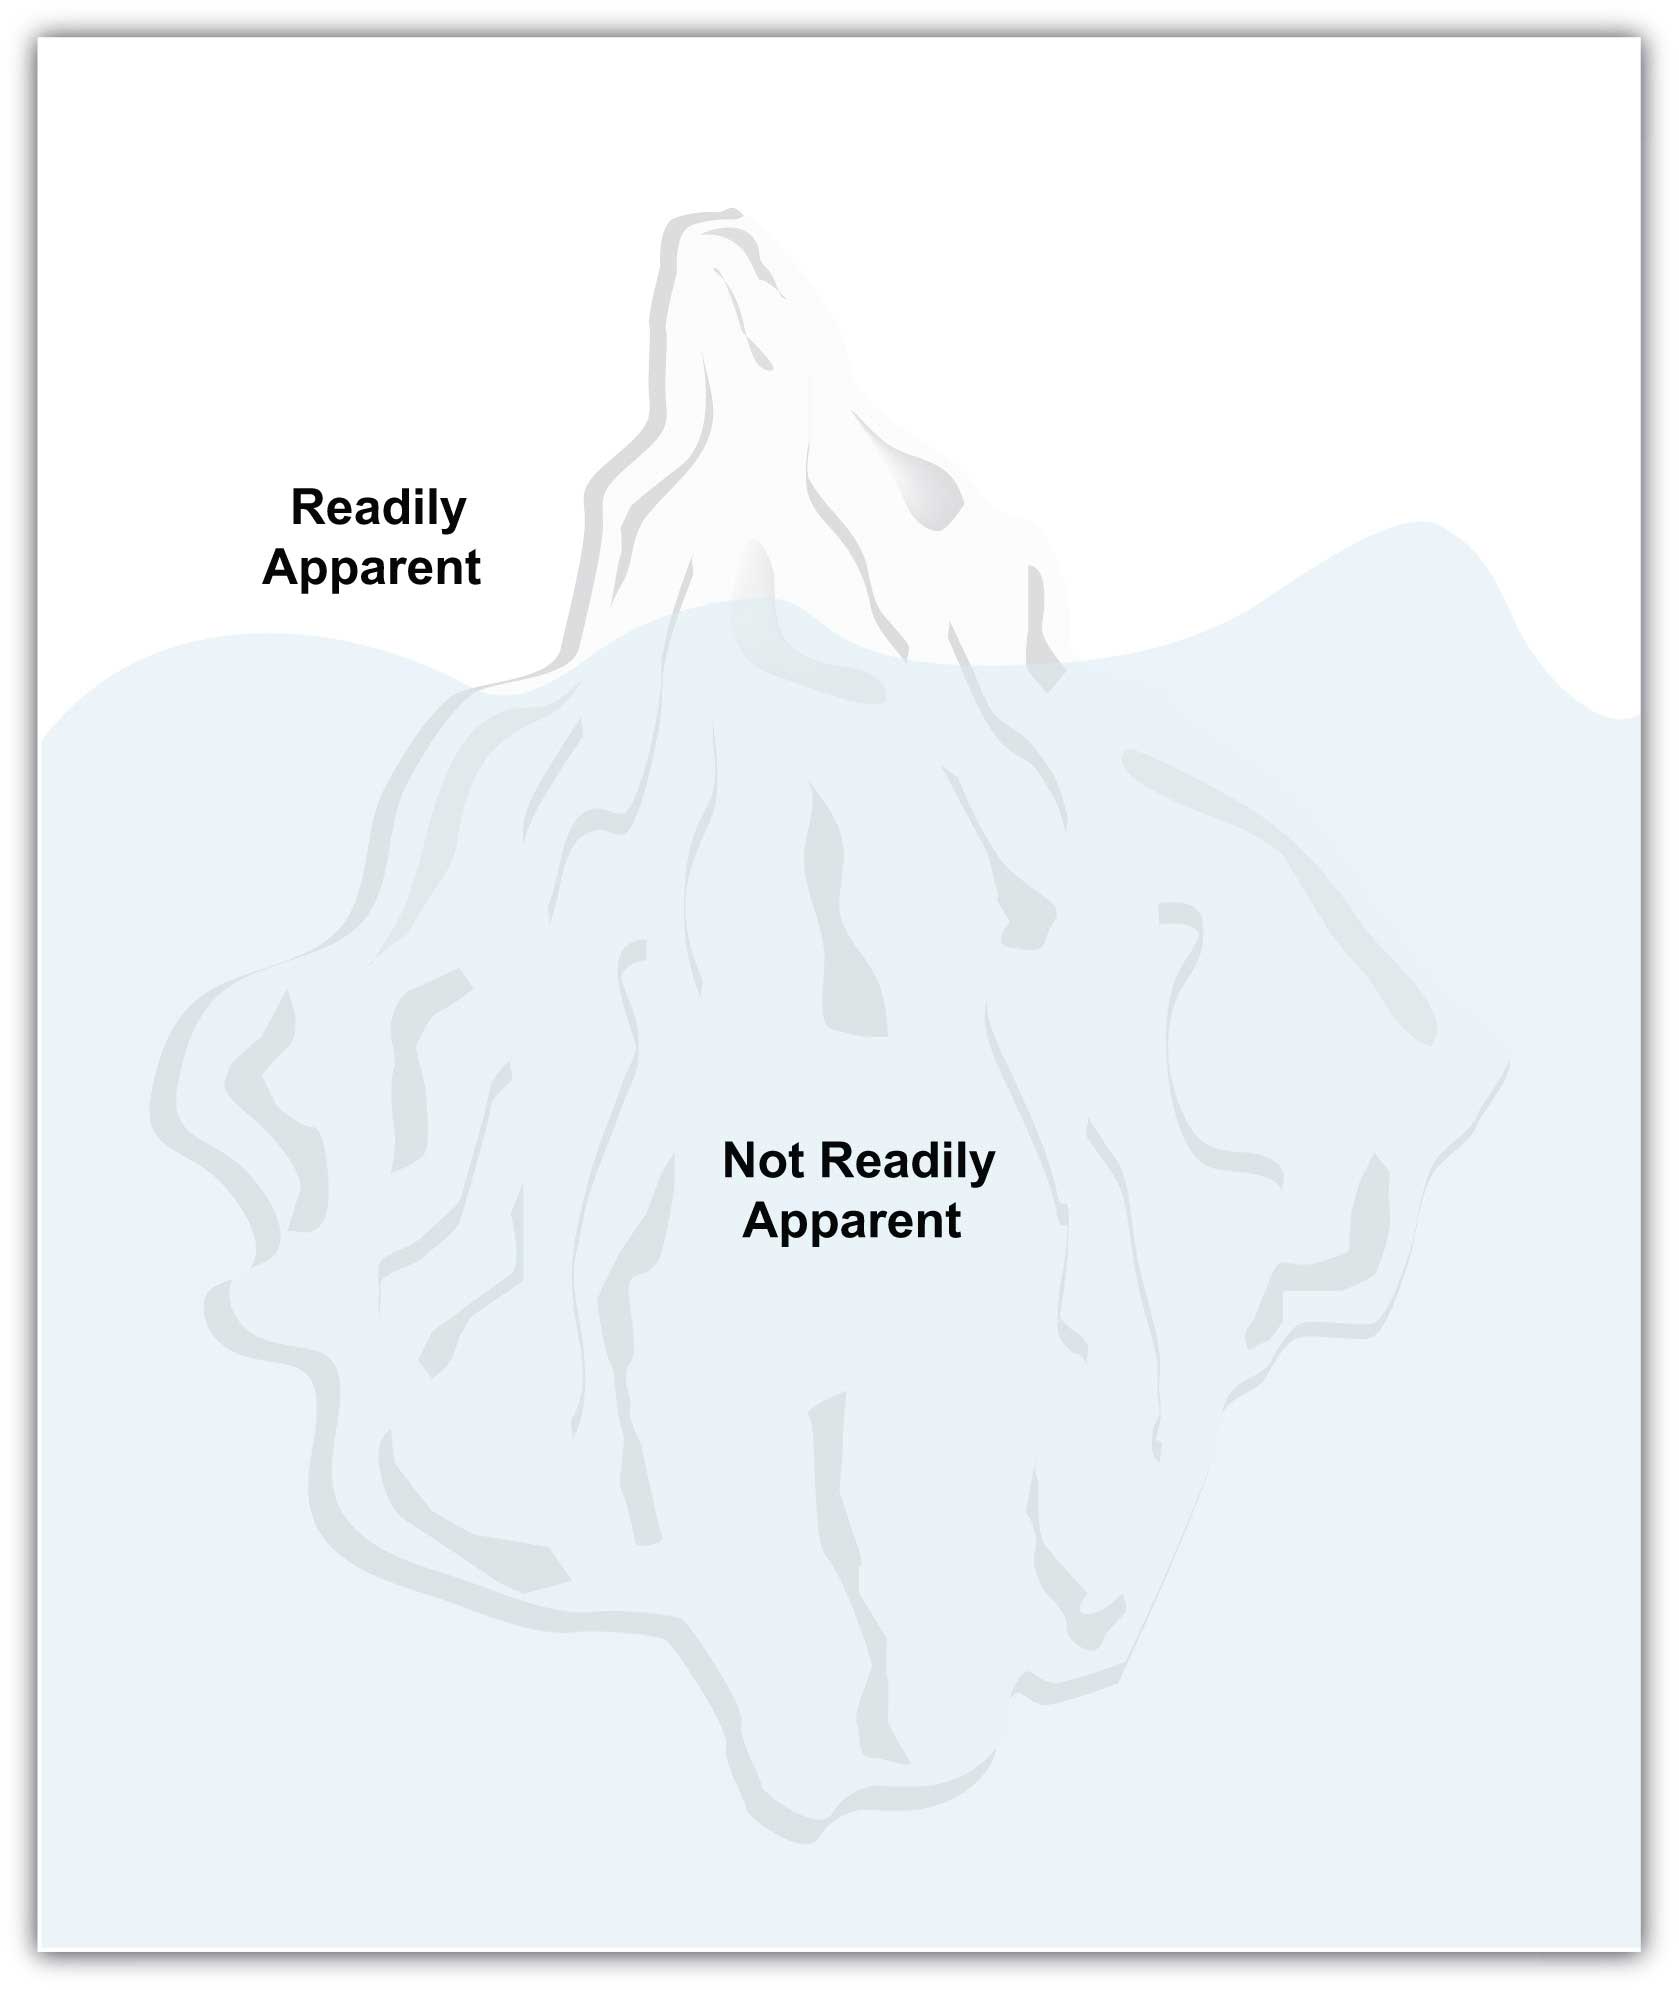 The American Foreign Service Manual Iceberg Model showing the tip of the iceberg is what is readily apparent, and everything under water is not readily apparent